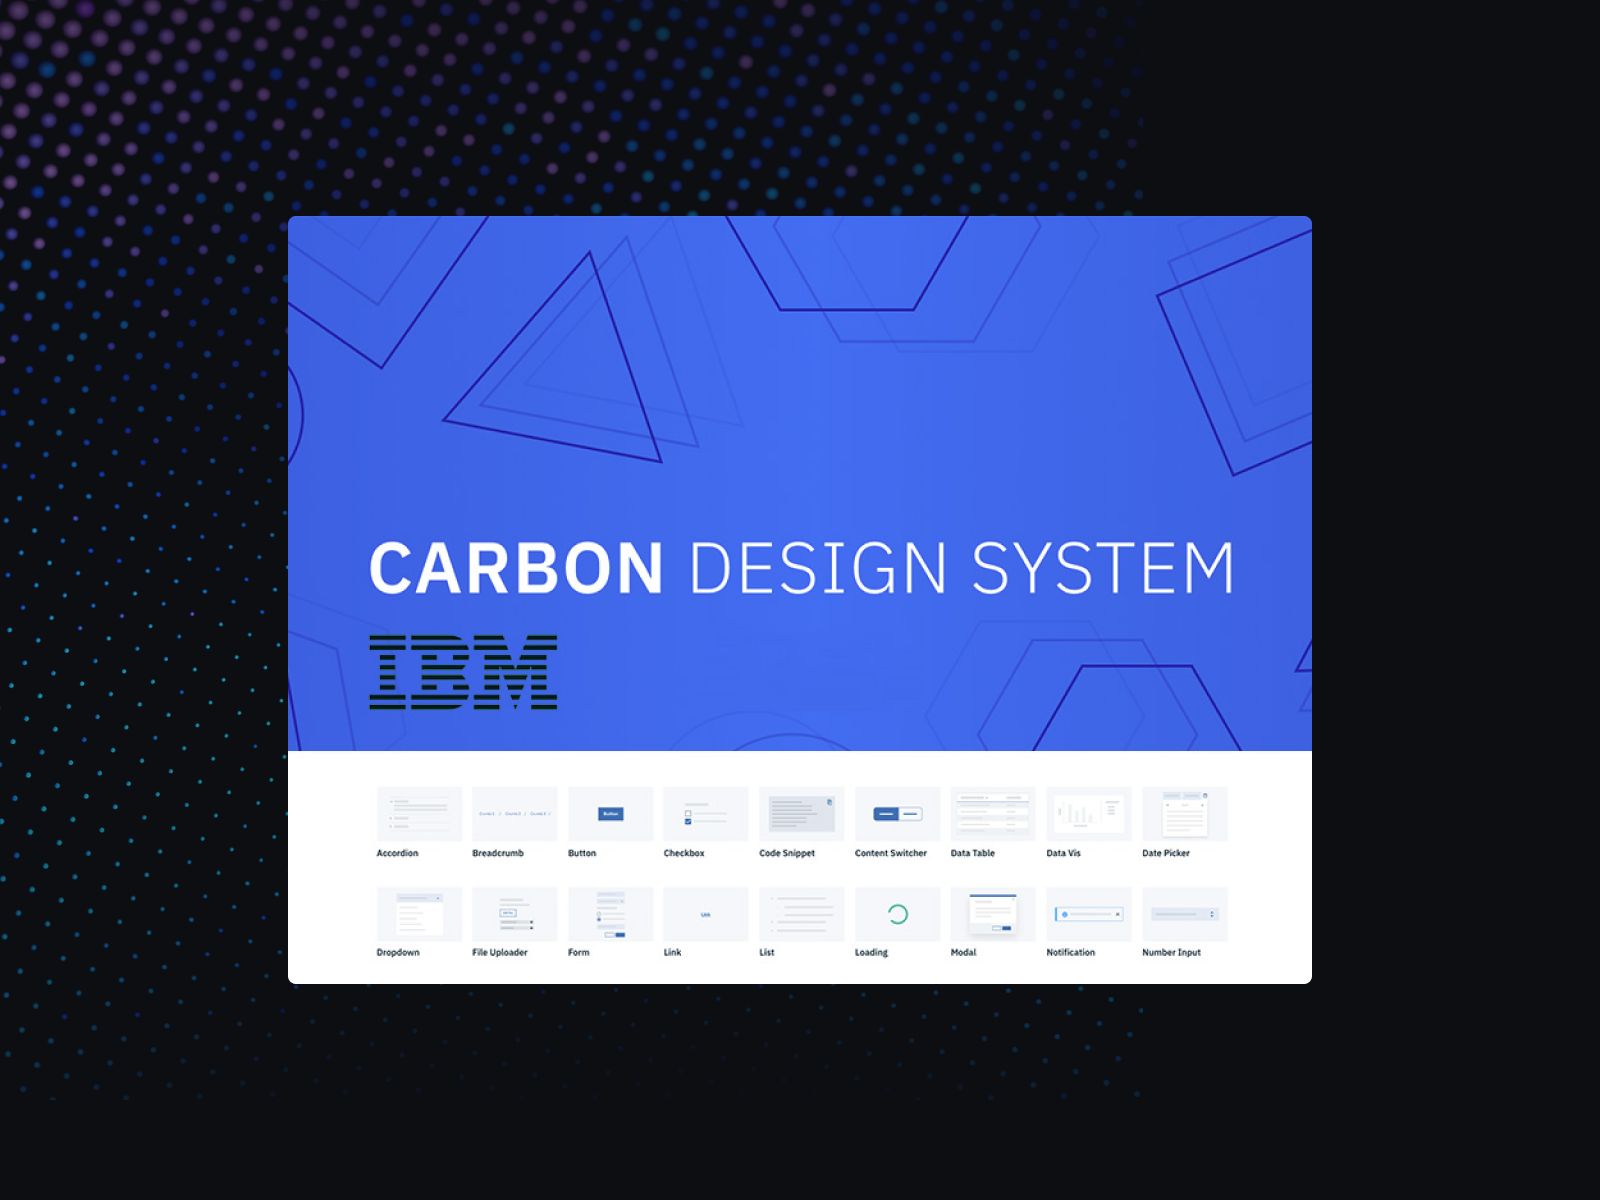 Shown is the Carbon Design System landing page